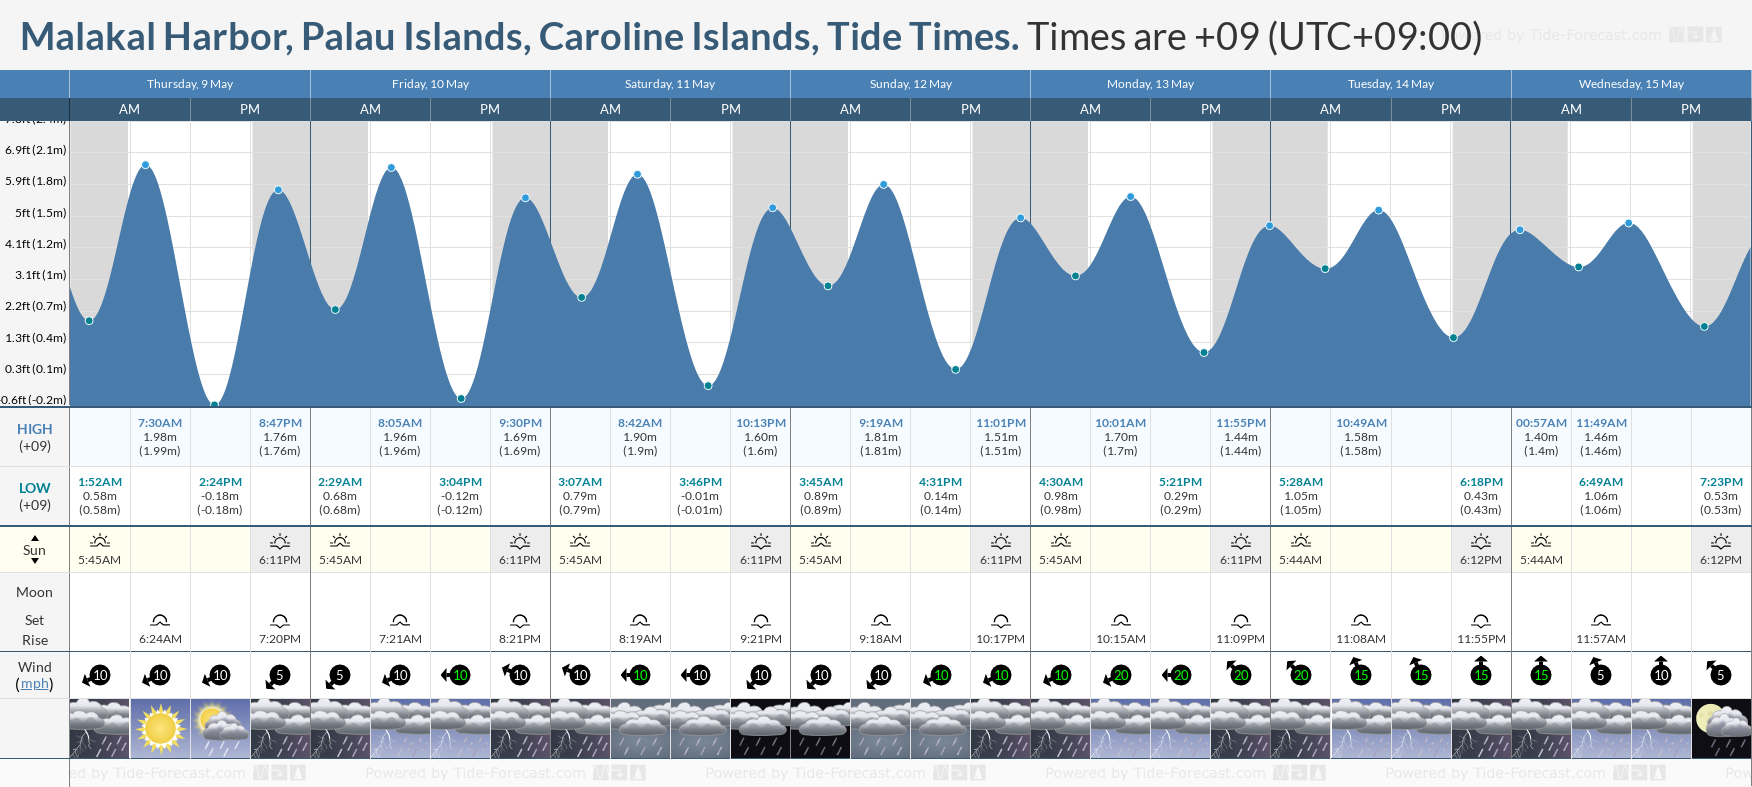 Malakal Harbor, Palau Islands, Caroline Islands Tide Chart including high and low tide tide times for the next 7 days